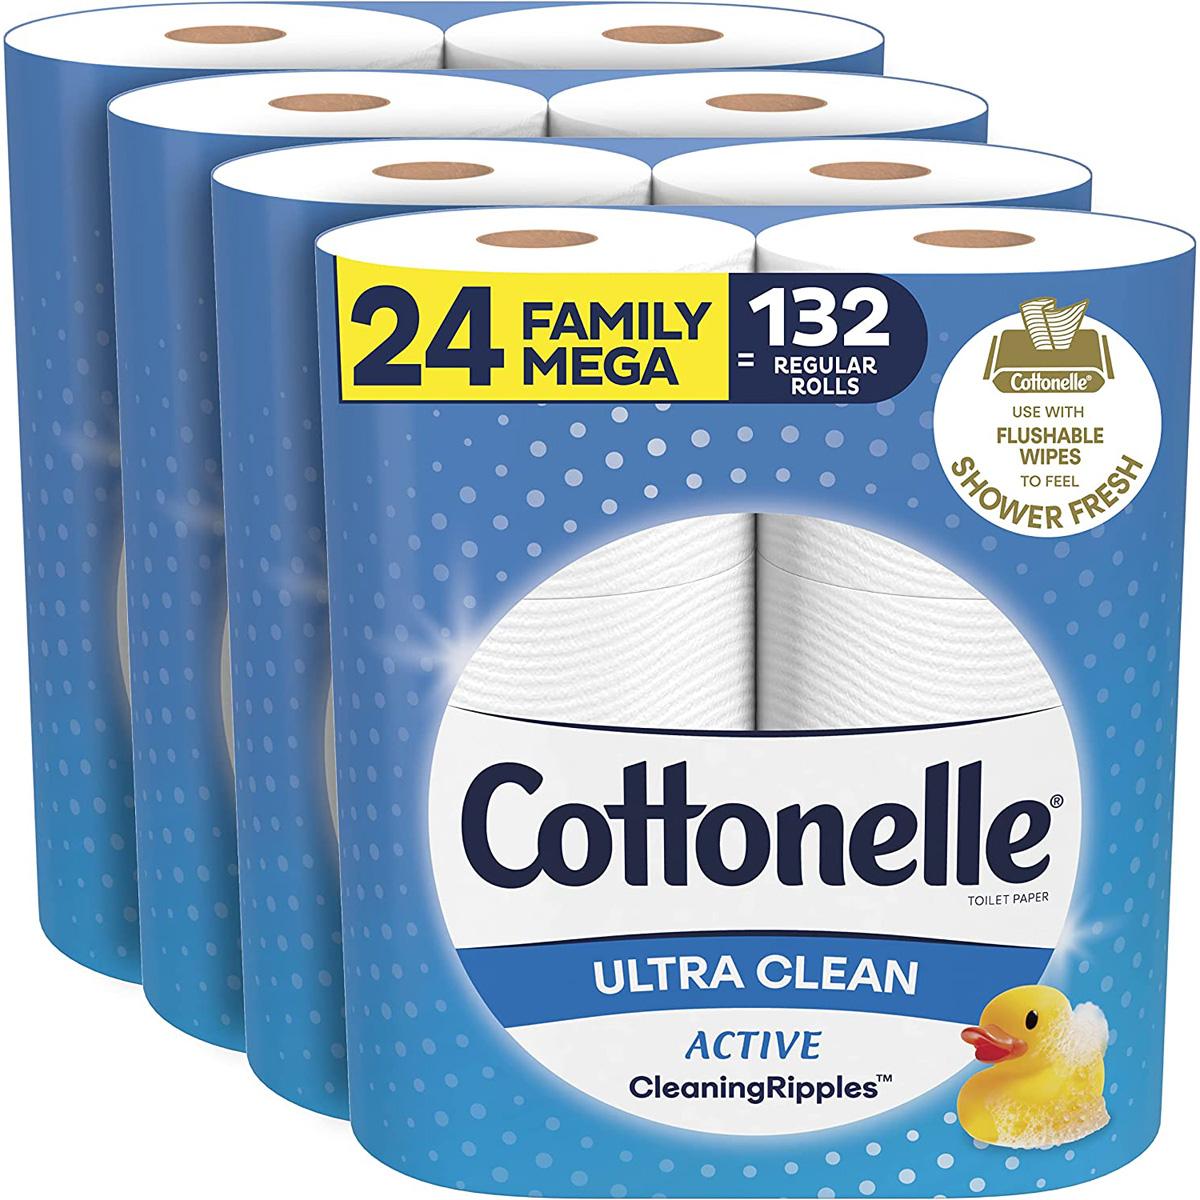 24 Cottonelle Ultra Clean Toilet Paper Rolls for $22.56 Shipped